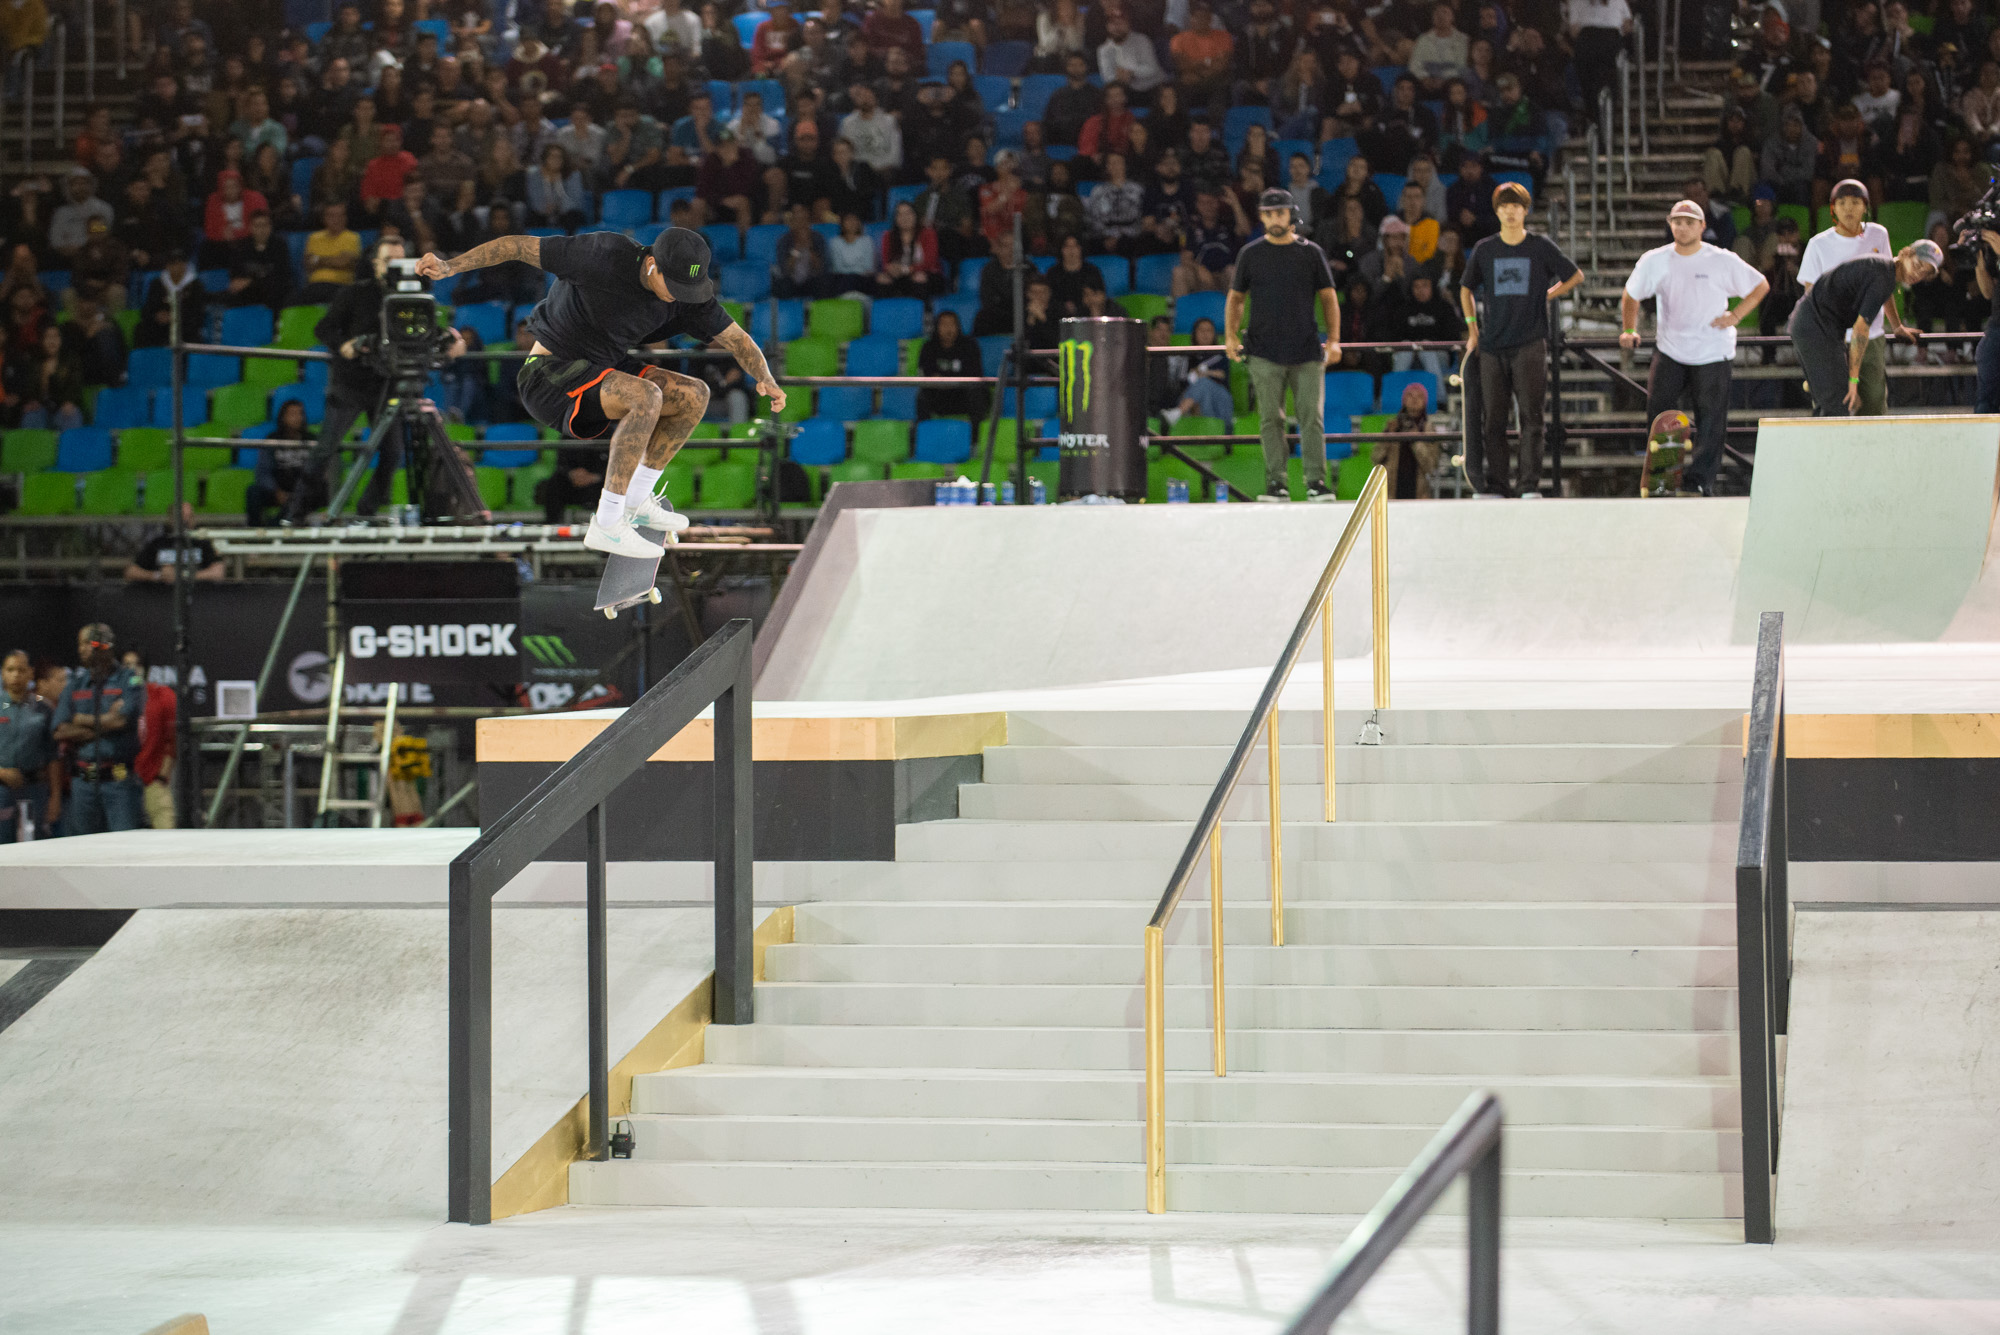 Monster Energy’s Nyjah Huston Takes First Place at the 2019 SLS World Championship in São Paulo